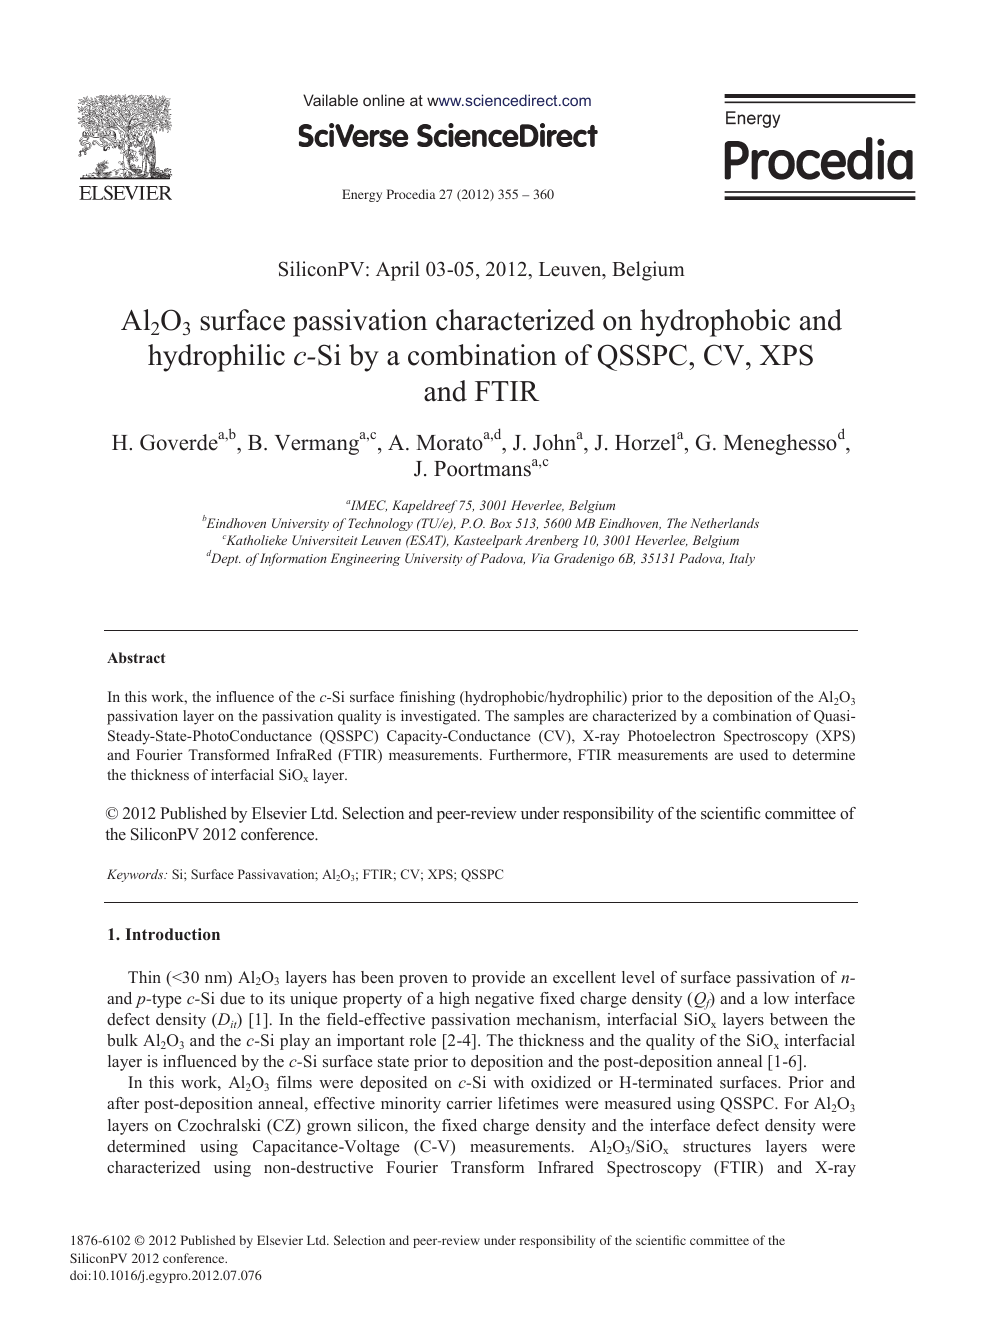 Al2o3 Surface Passivation Characterized On Hydrophobic And Hydrophilic C Si By A Combination Of Qsspc Cv Xps And Ftir Topic Of Research Paper In Materials Engineering Download Scholarly Article Pdf And Read